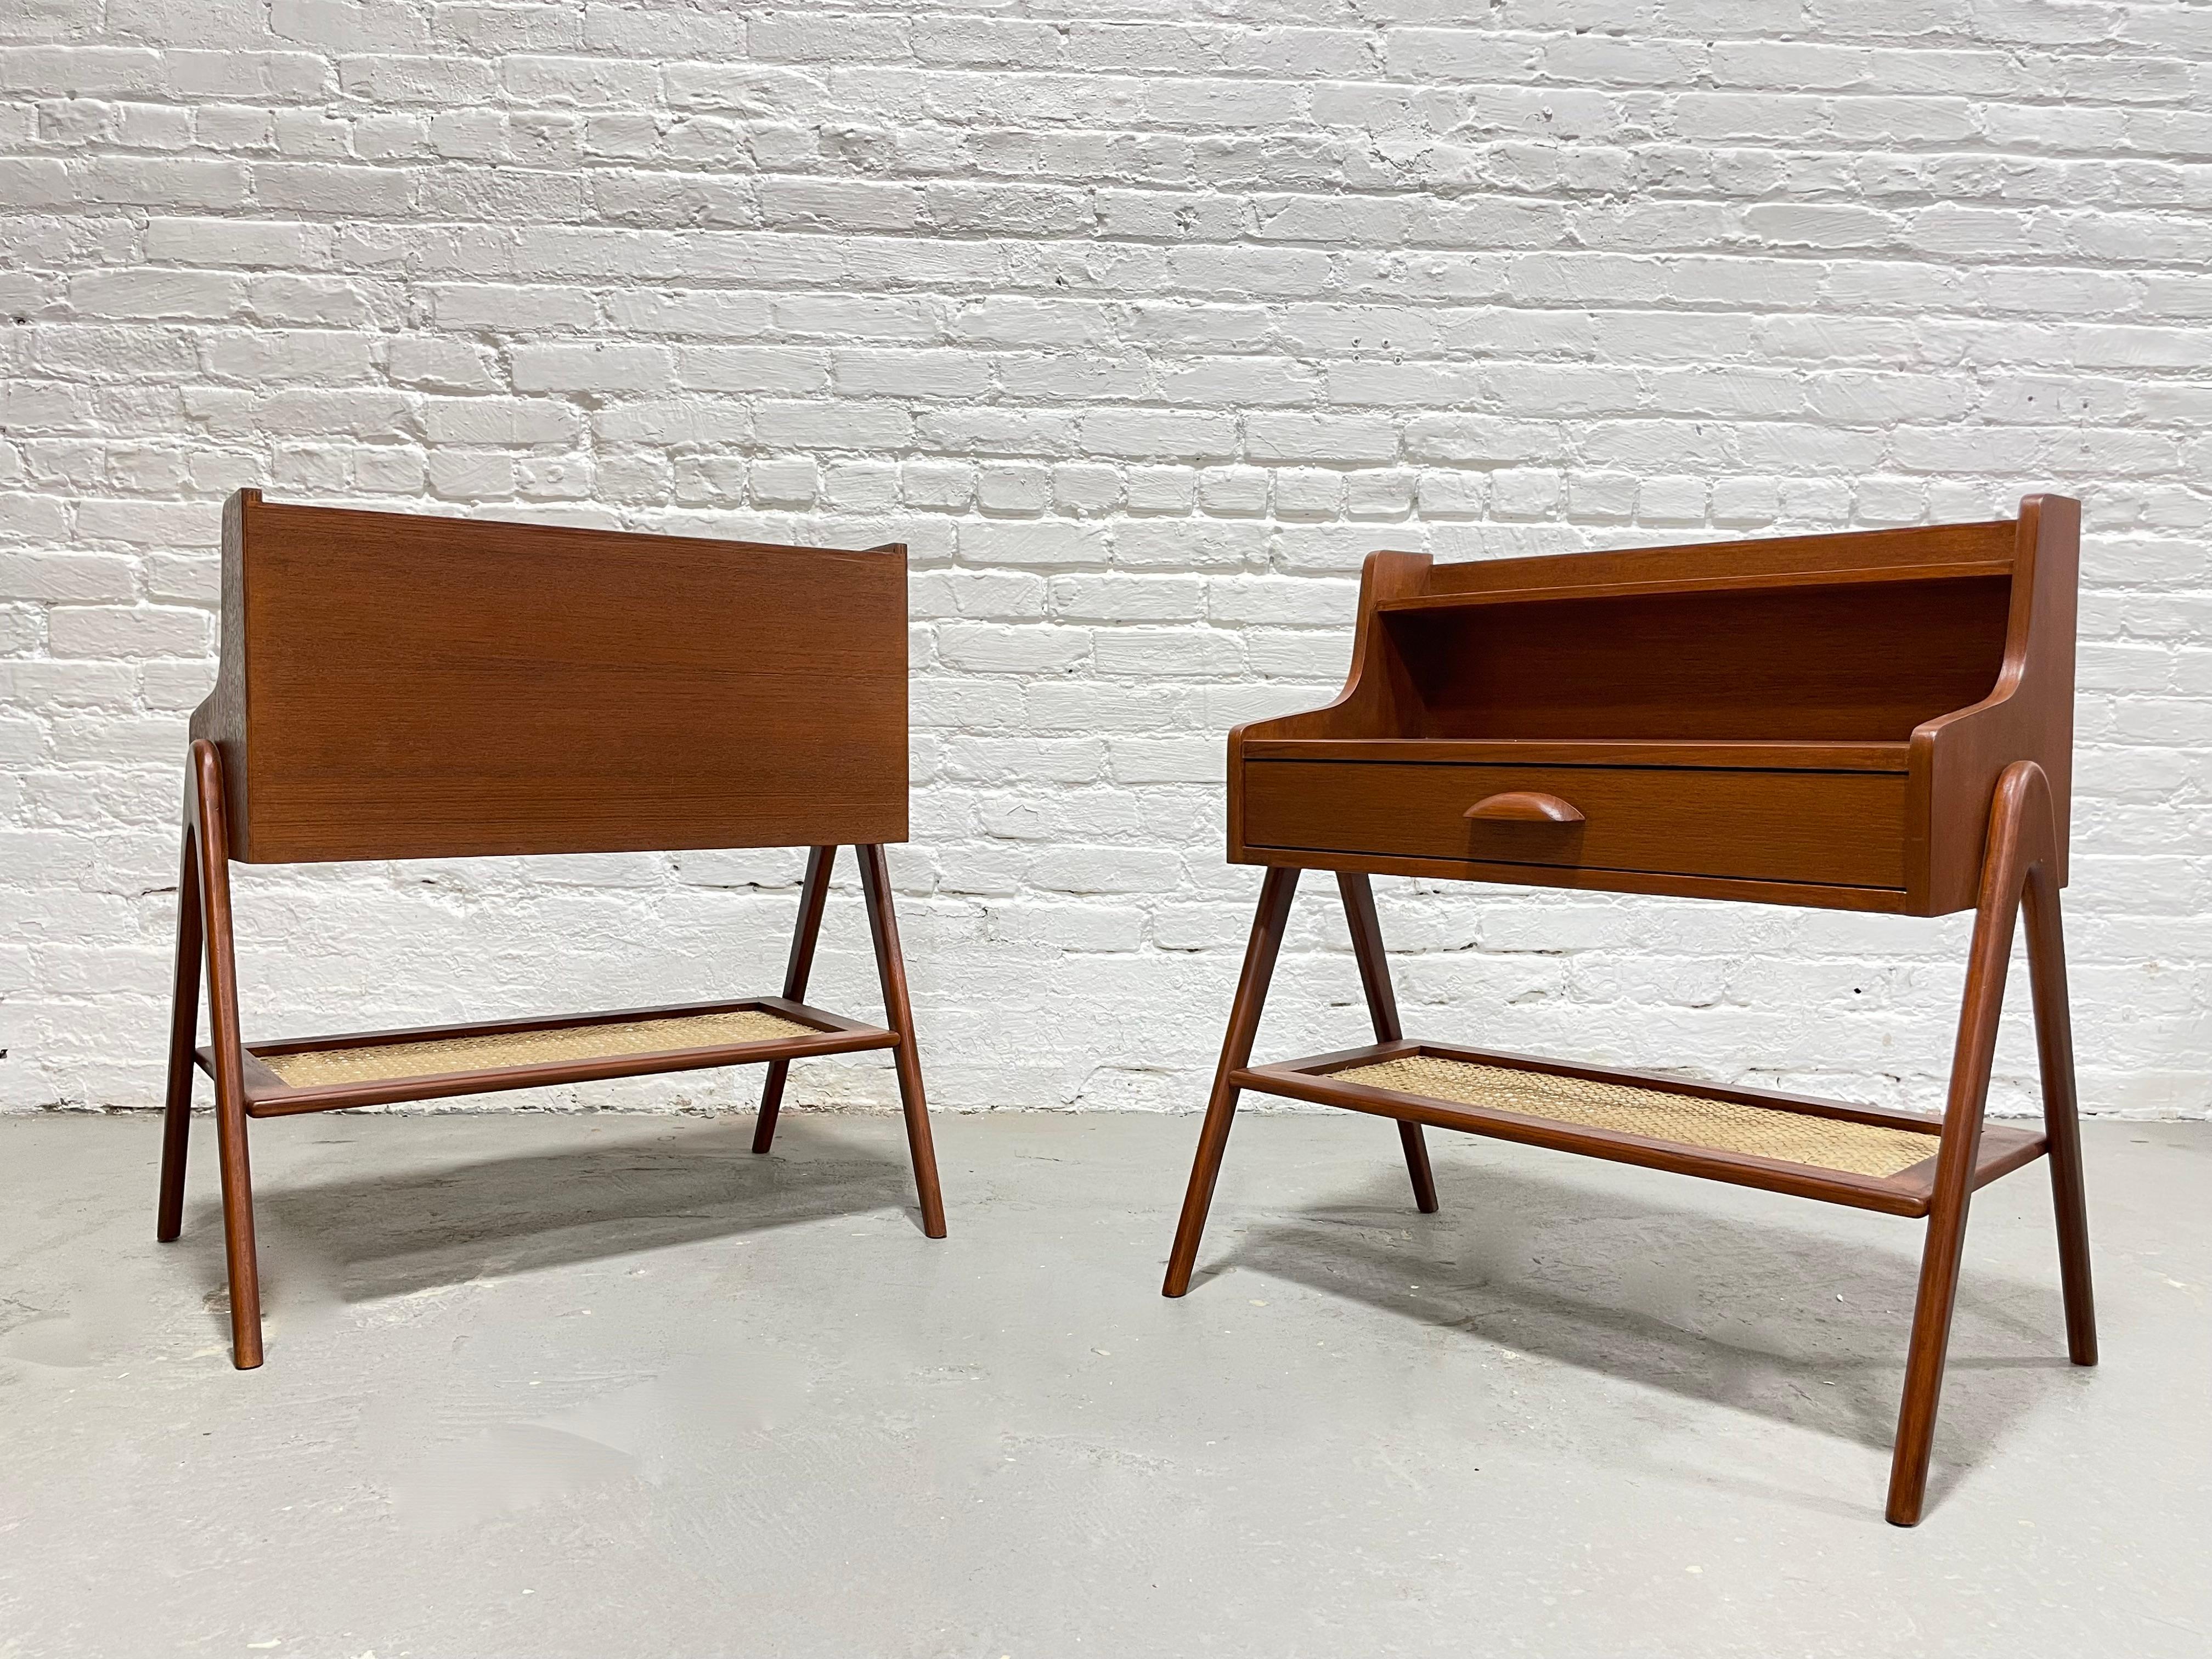 Pair of Mid-Century Modern Handcrafted Caned Teak Cabinets / Entryway Tables For Sale 9